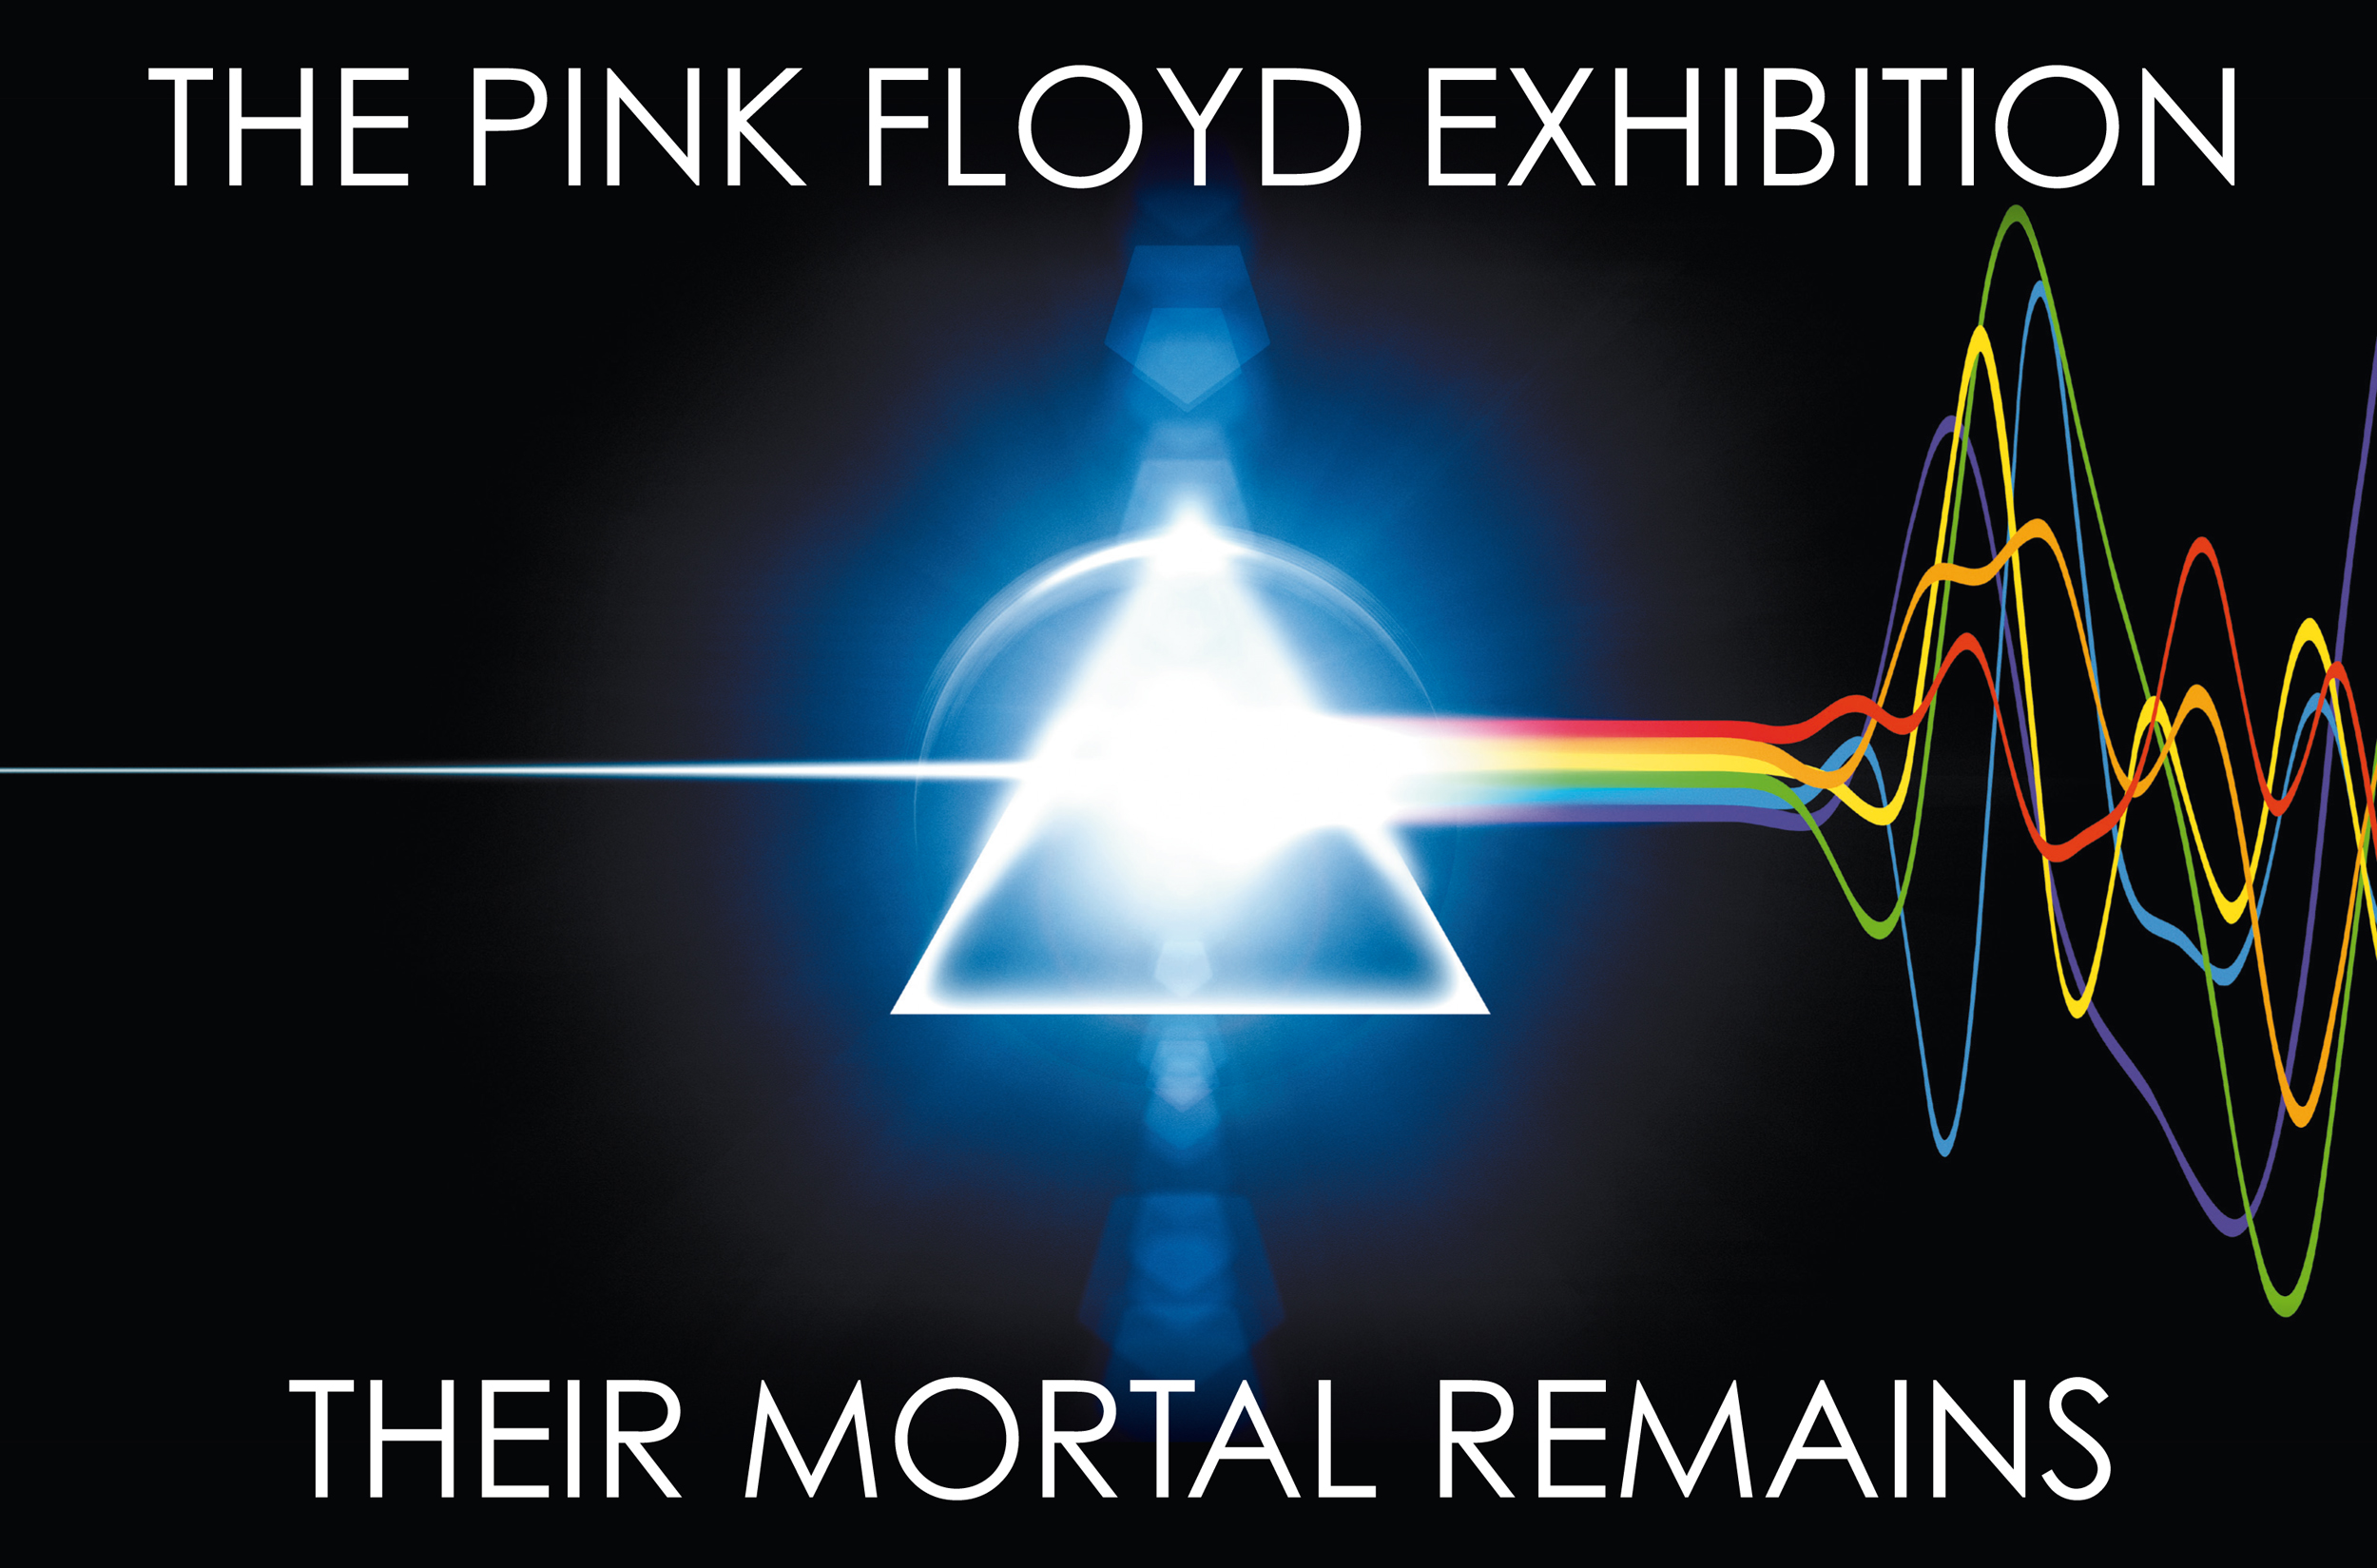 Mostre Milano 2014: annullata &#8220;The Pink Floyd Exhibition&#8221;